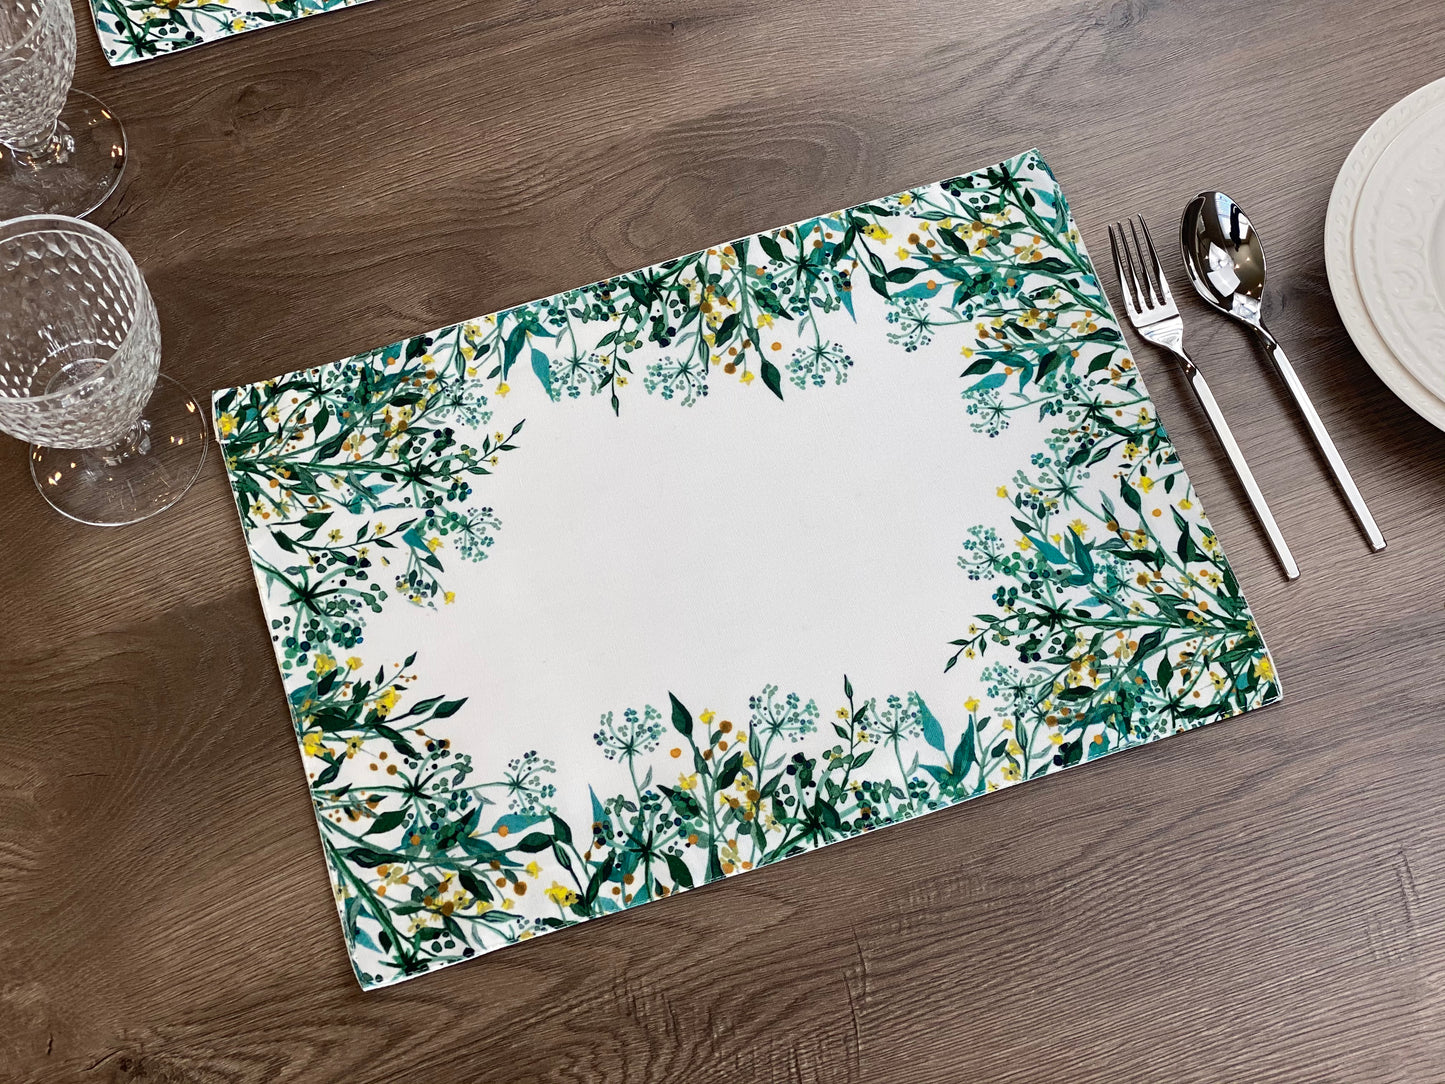 Set of 4 Green leaf, branch and Wildflower Botanical Frame Placemat, Washable Cotton Placemat for fall dining table